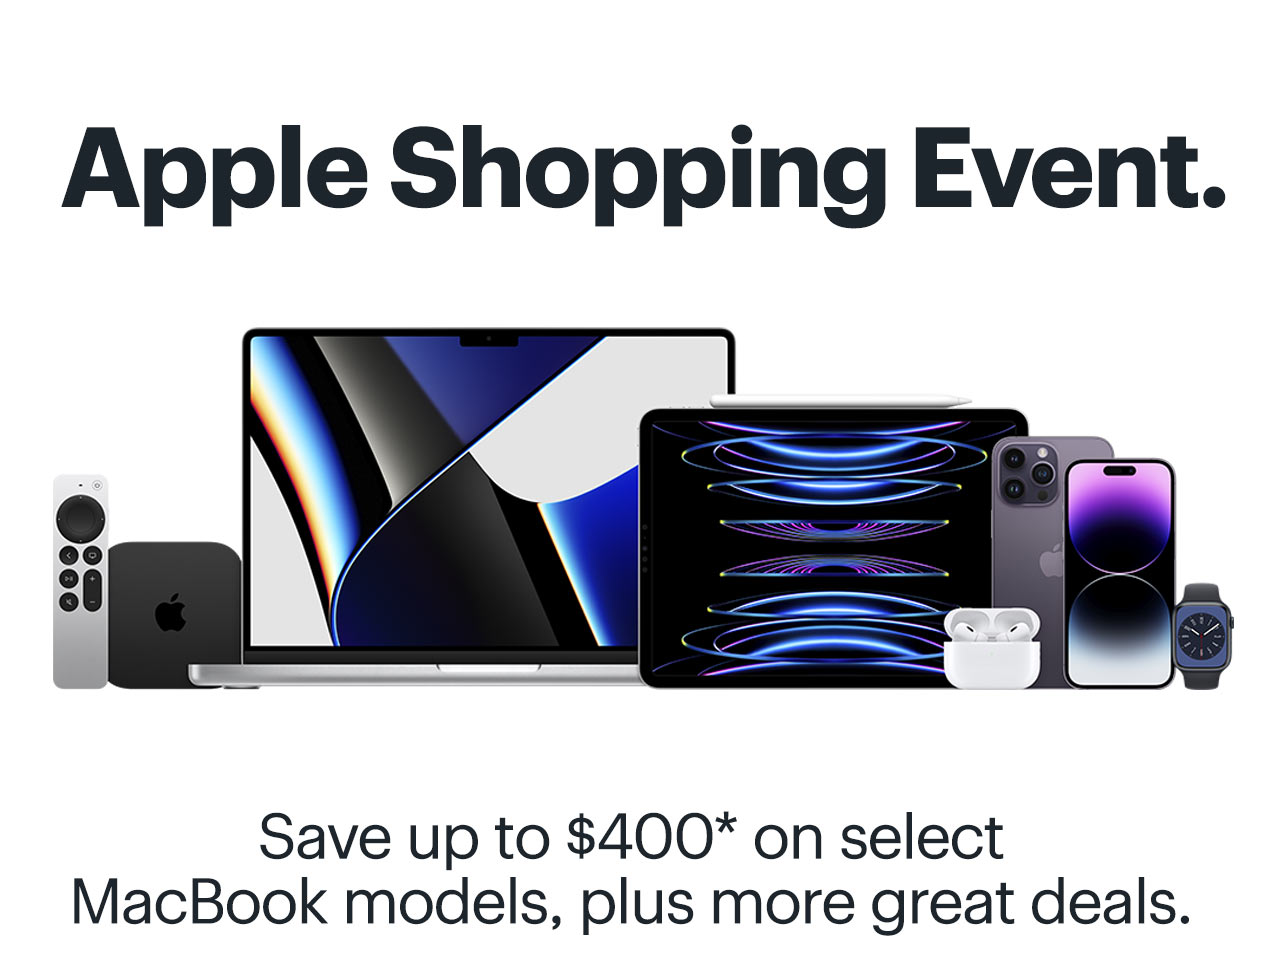 Apple Shopping Event. Save up to $400 on select MacBook models, plus more great deals. Reference disclaimer. Apple Shopping Event. Save up to $400* on select MacBook models, plus more great deals. 